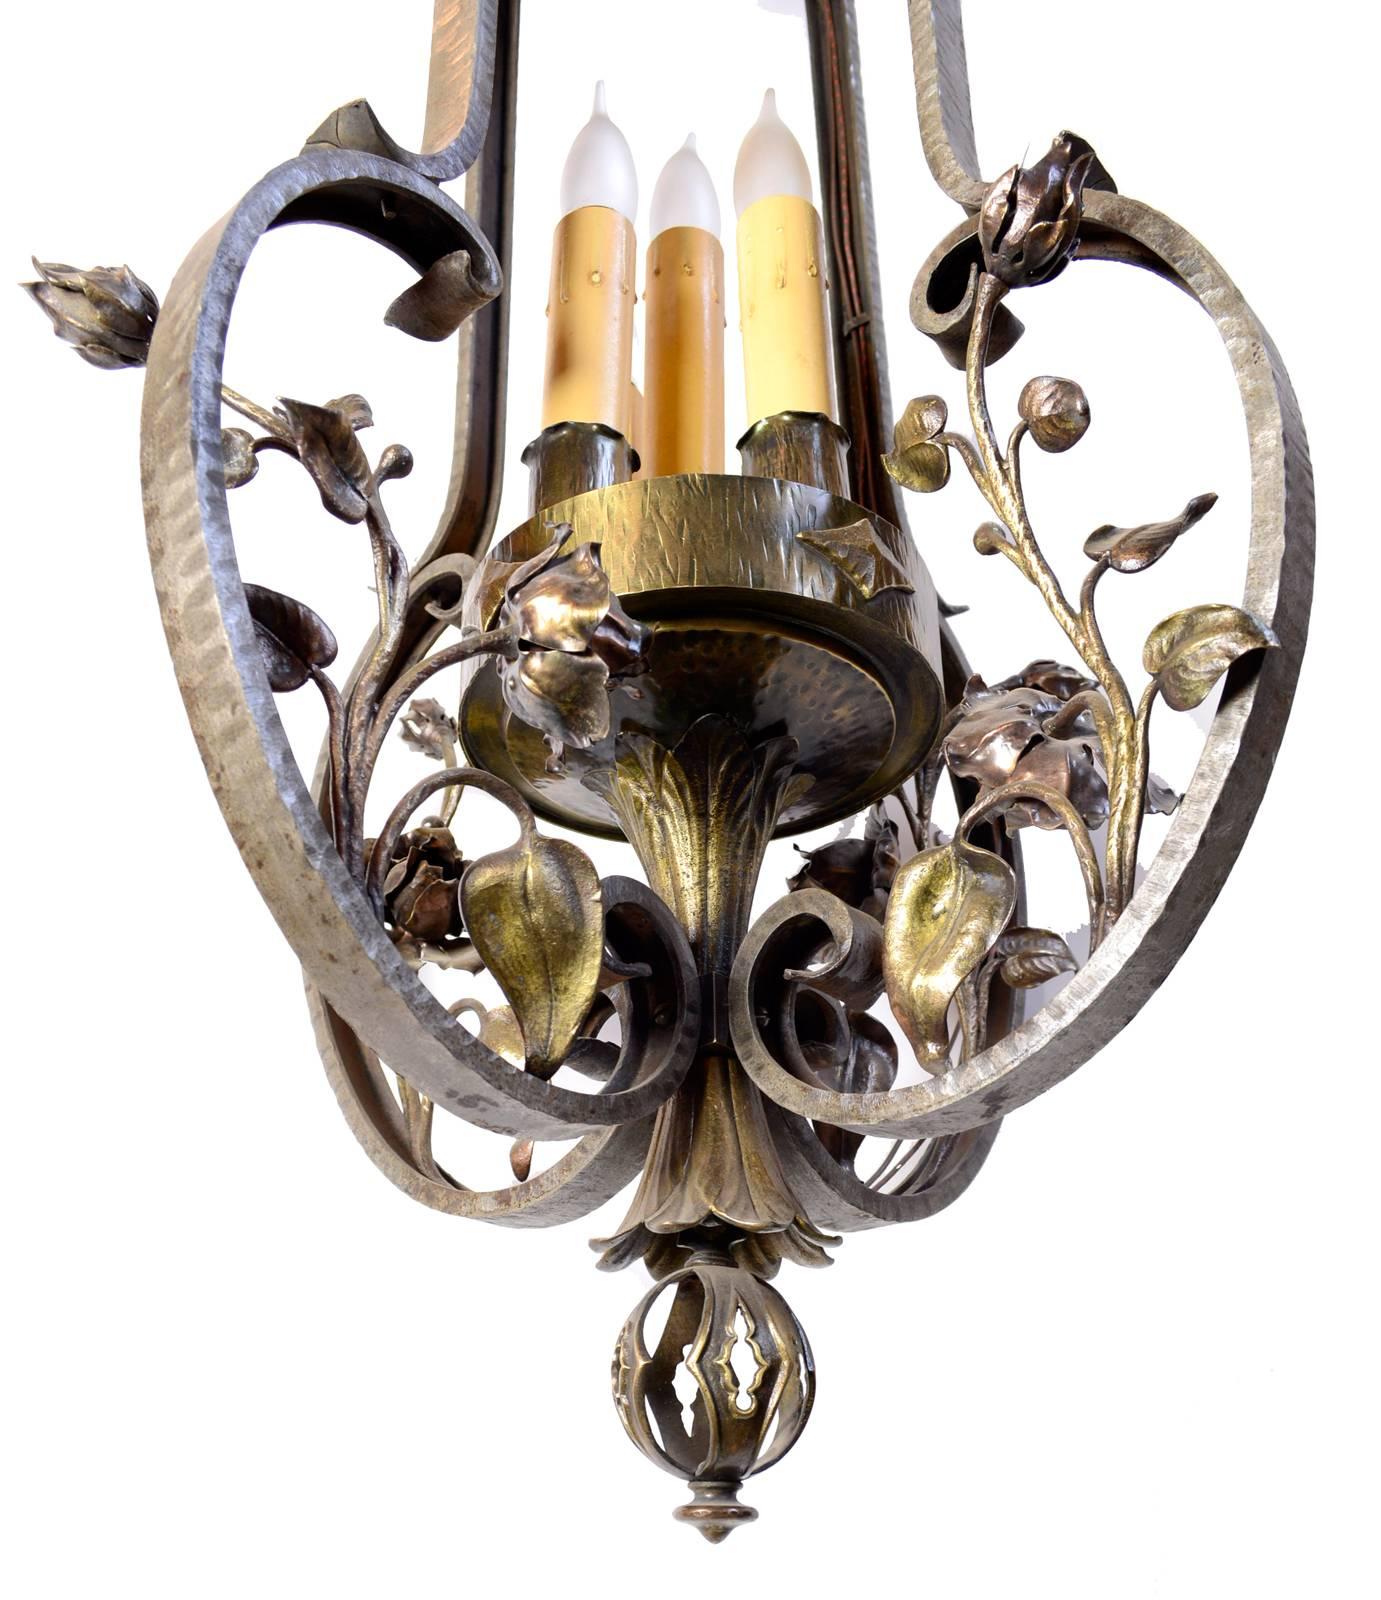 This amazing fixture features details and craftsmanship belonging to an era long past. A mix of hand-wrought iron and cast bronze creates the frame of this elaborate pendant, where organic vines are interwoven with the large bronze arms. An